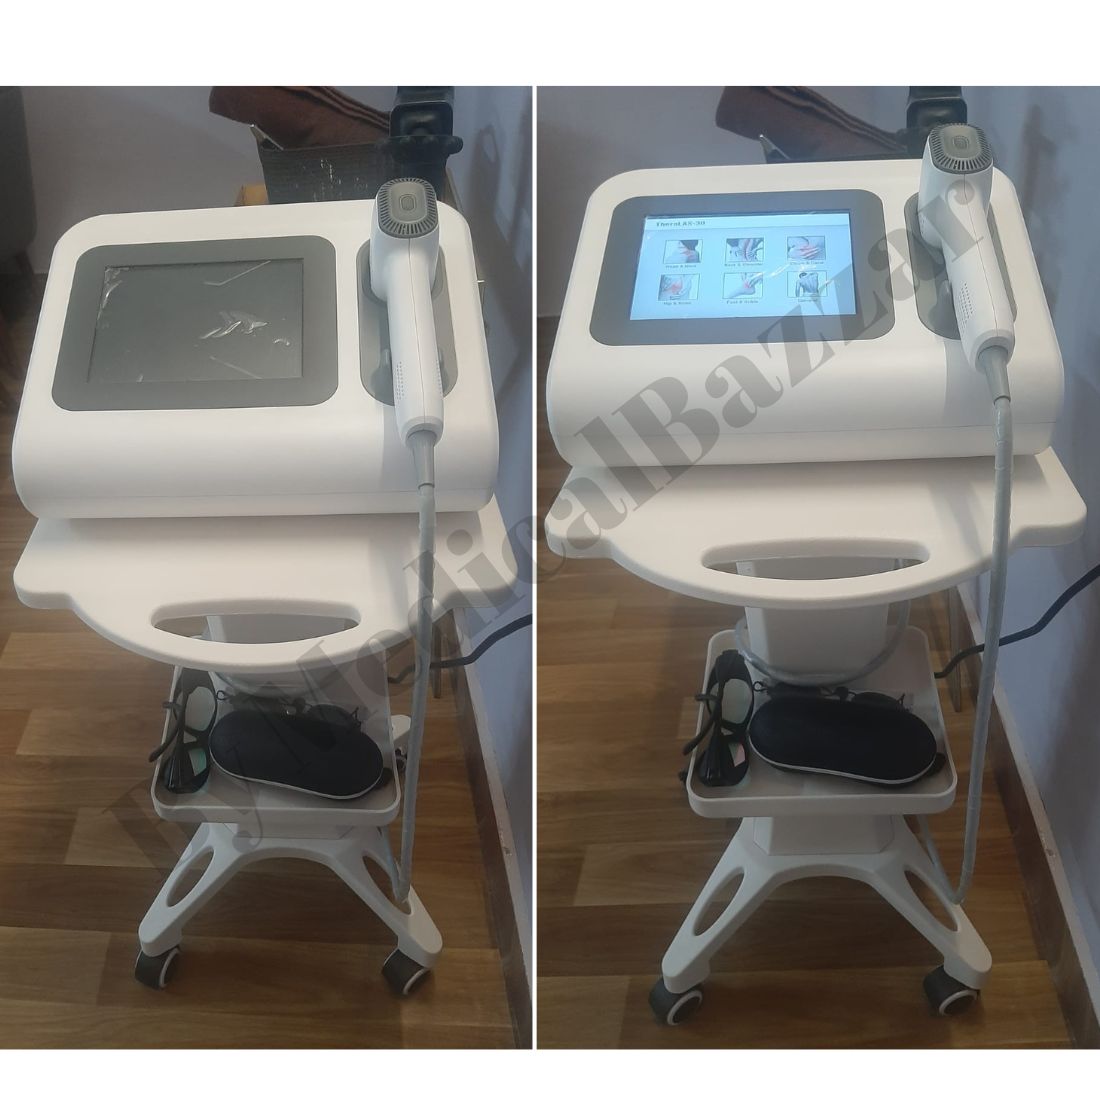 Class IV Laser Therapy (10 watt, Dual Wavelength- 980nm and 1064nm)